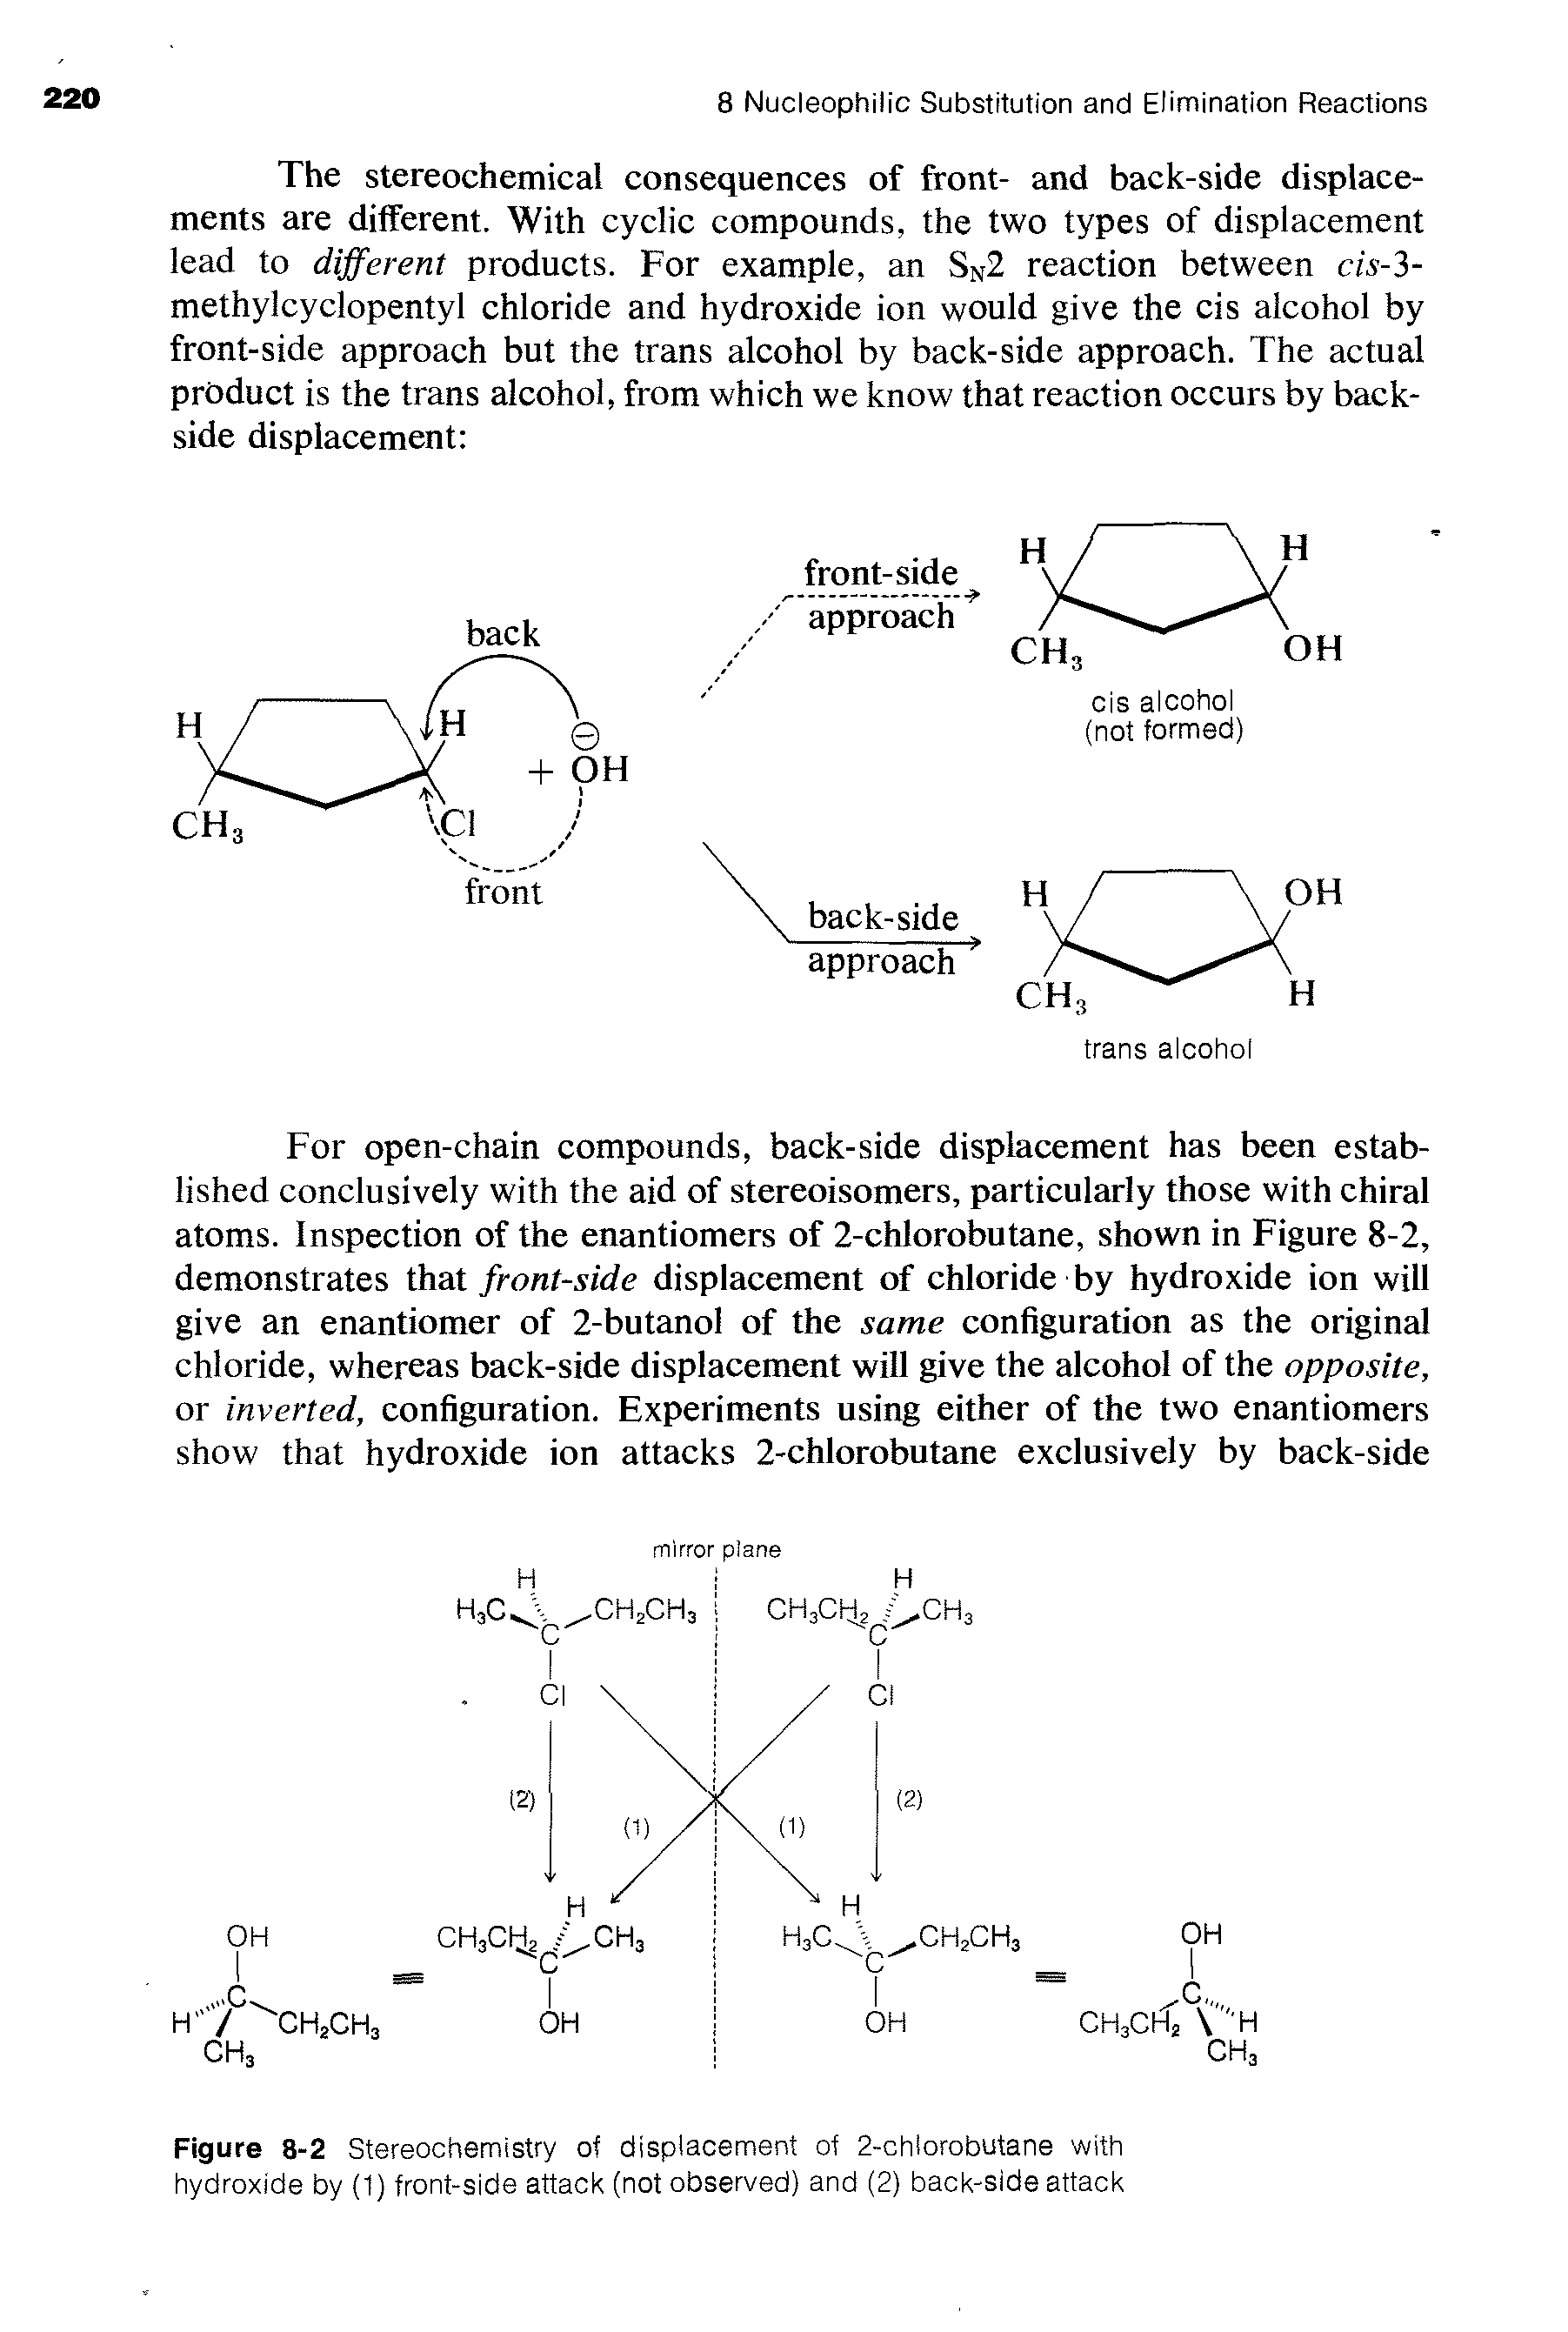 Figure 8-2 Stereochemistry of displacement of 2-chlorobutane with hydroxide by (1) front-side attack (not observed) and (2) back-side attack...